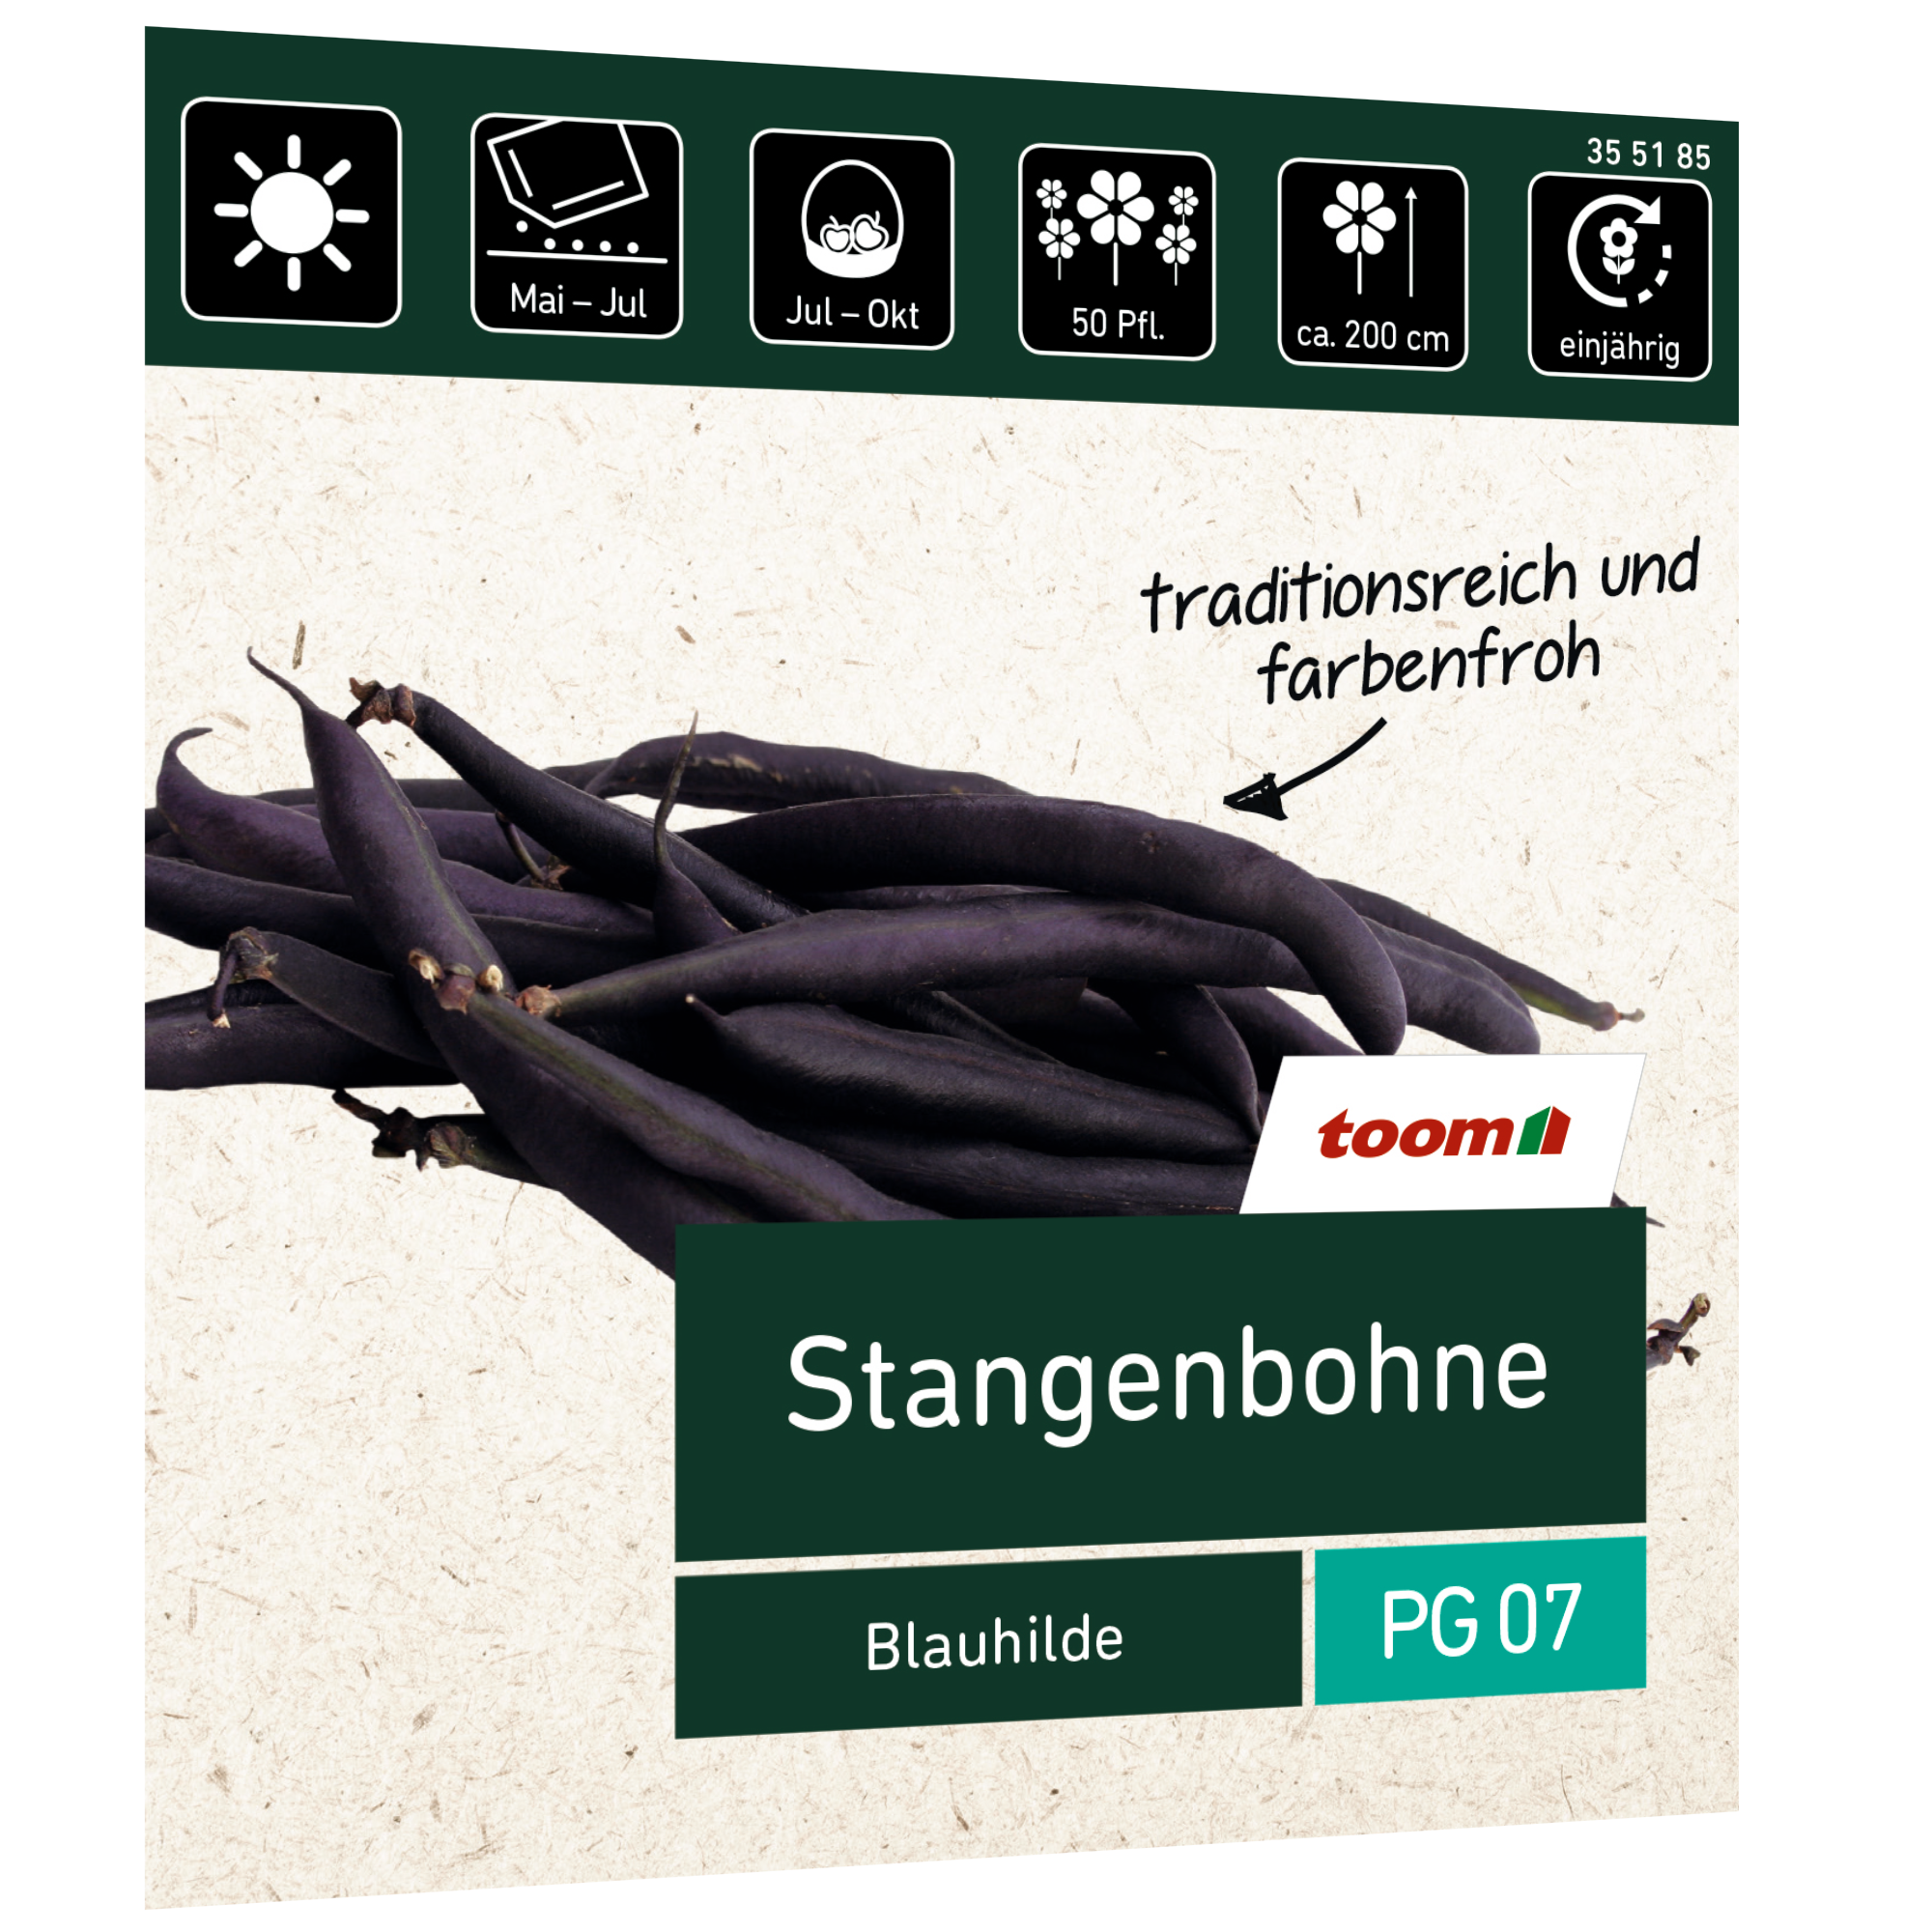 Stangenbohne 'Blauhilde' + product picture